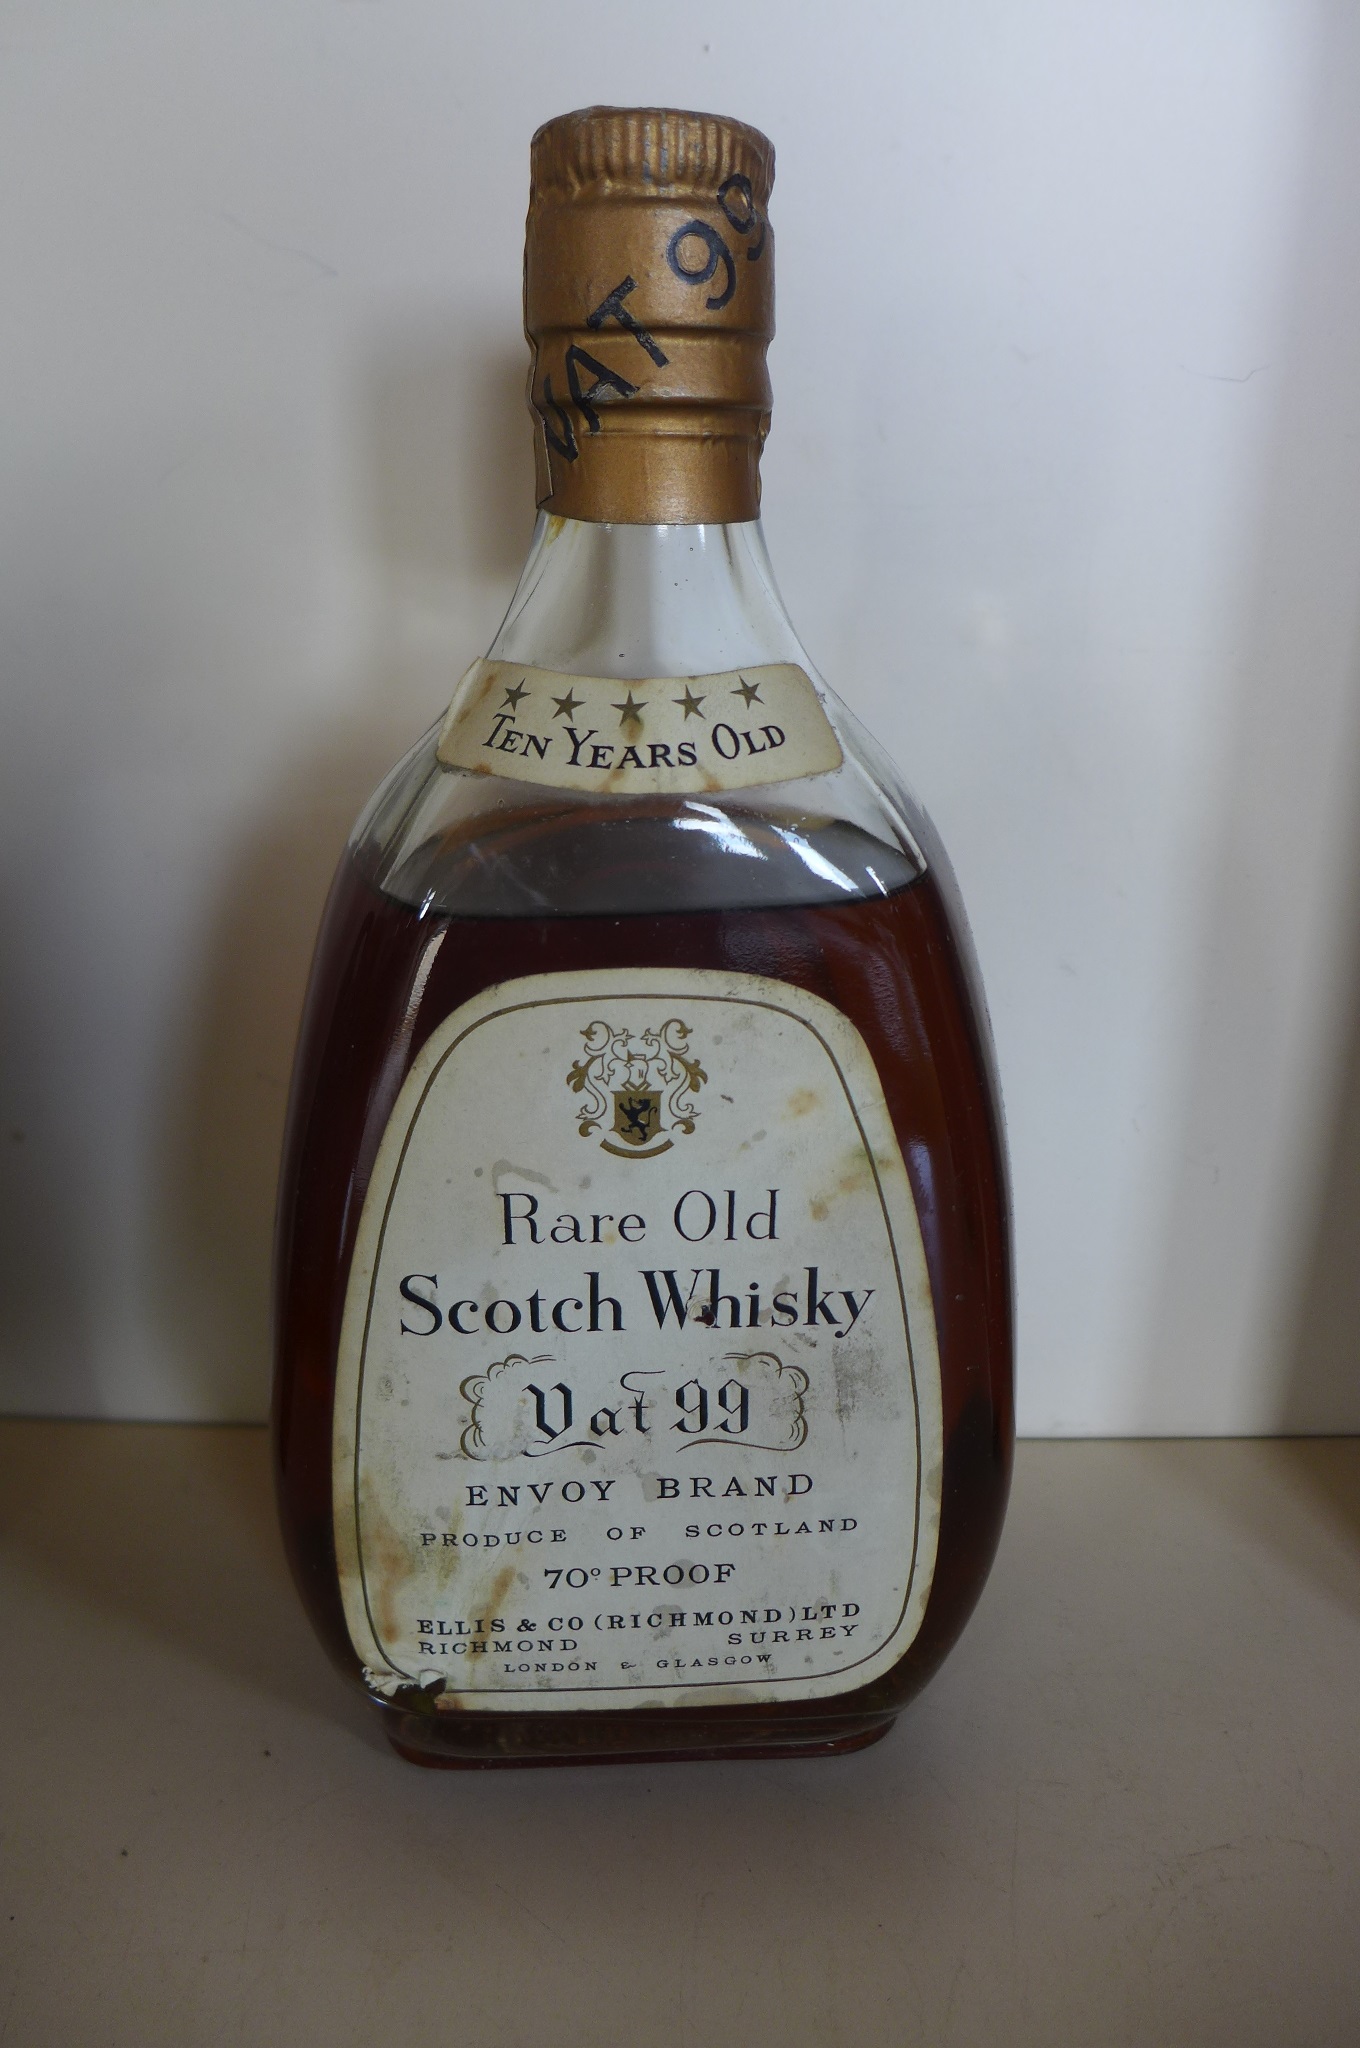 Envoy Brand Vat 99 ten years old rare old Scotch Whisky, level low